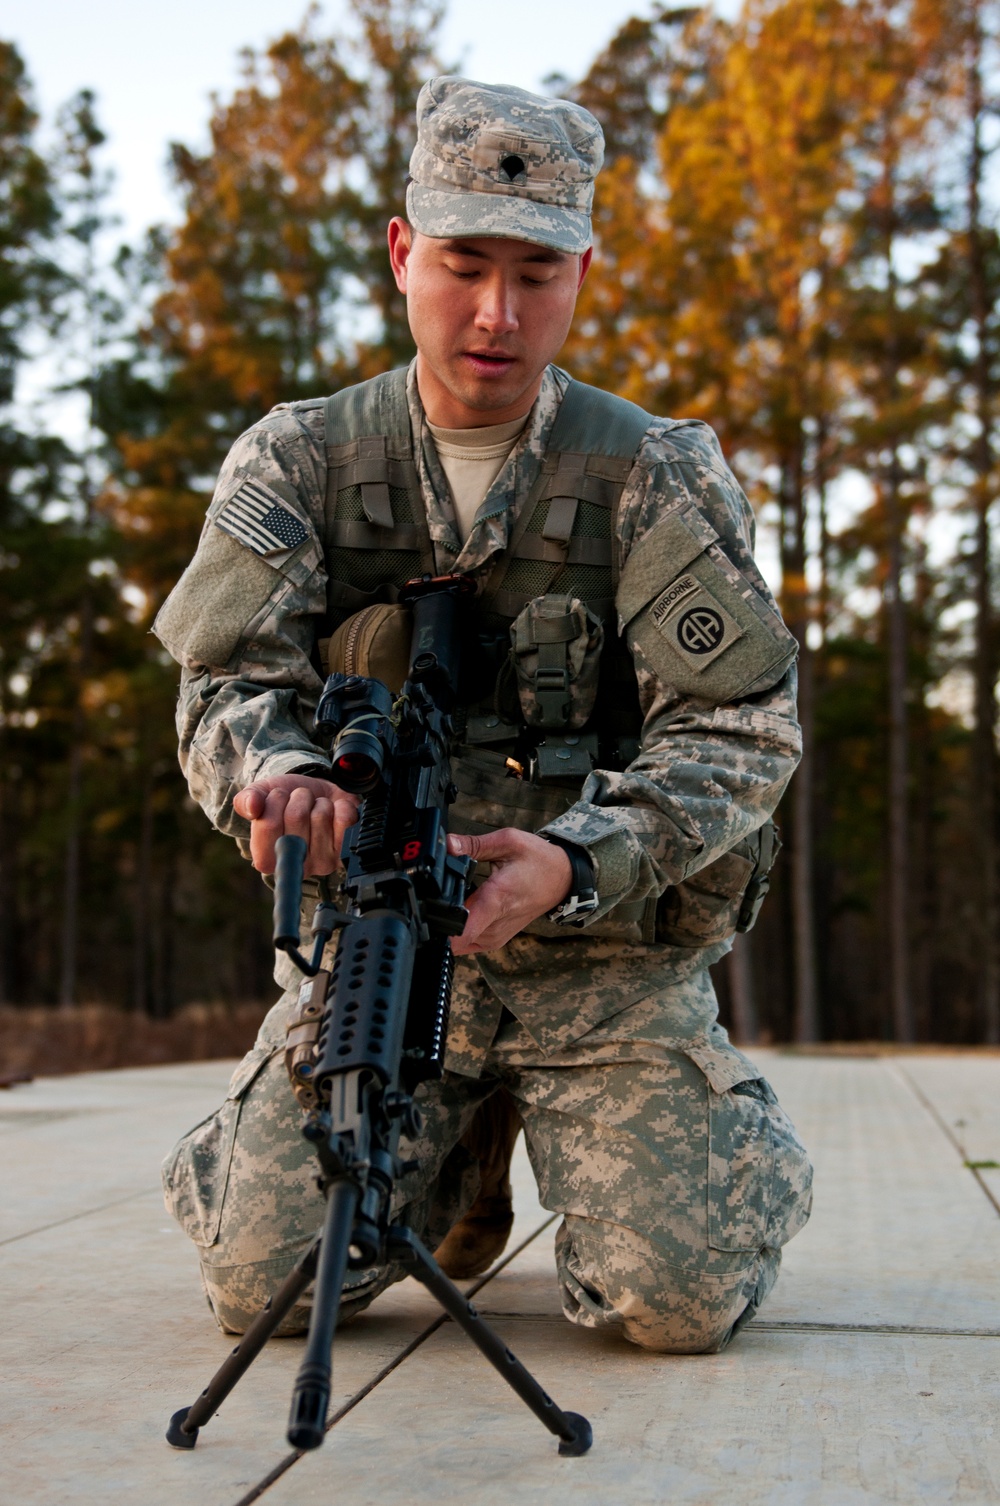 Trooper of the Year competitor performs Warrior Tasks